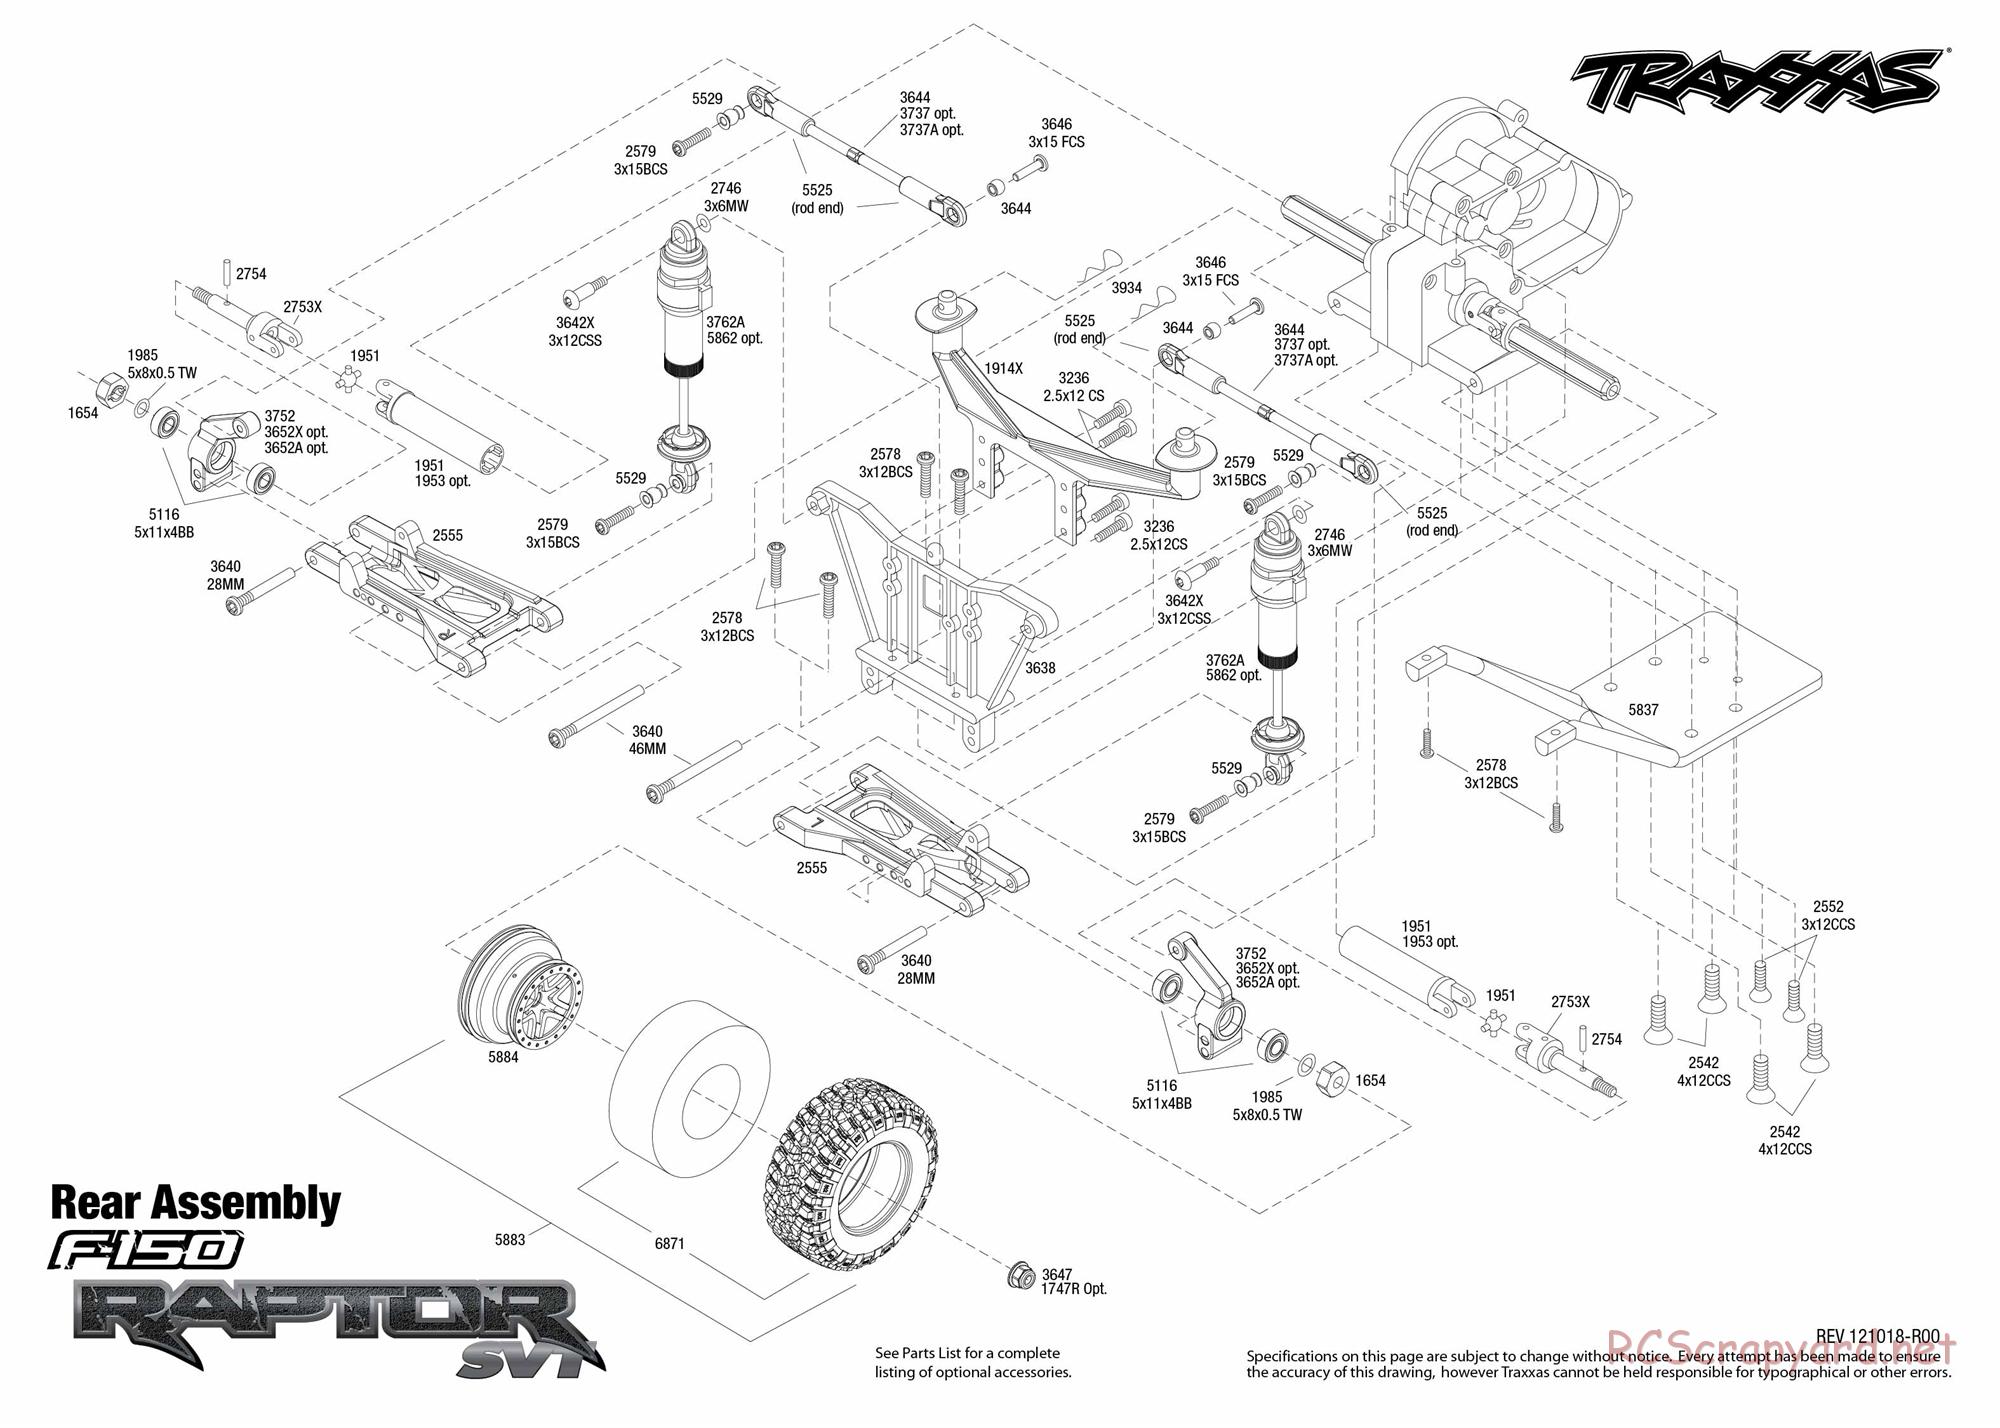 Traxxas - Ford F-150 SVT Raptor (2013) - Exploded Views - Page 3